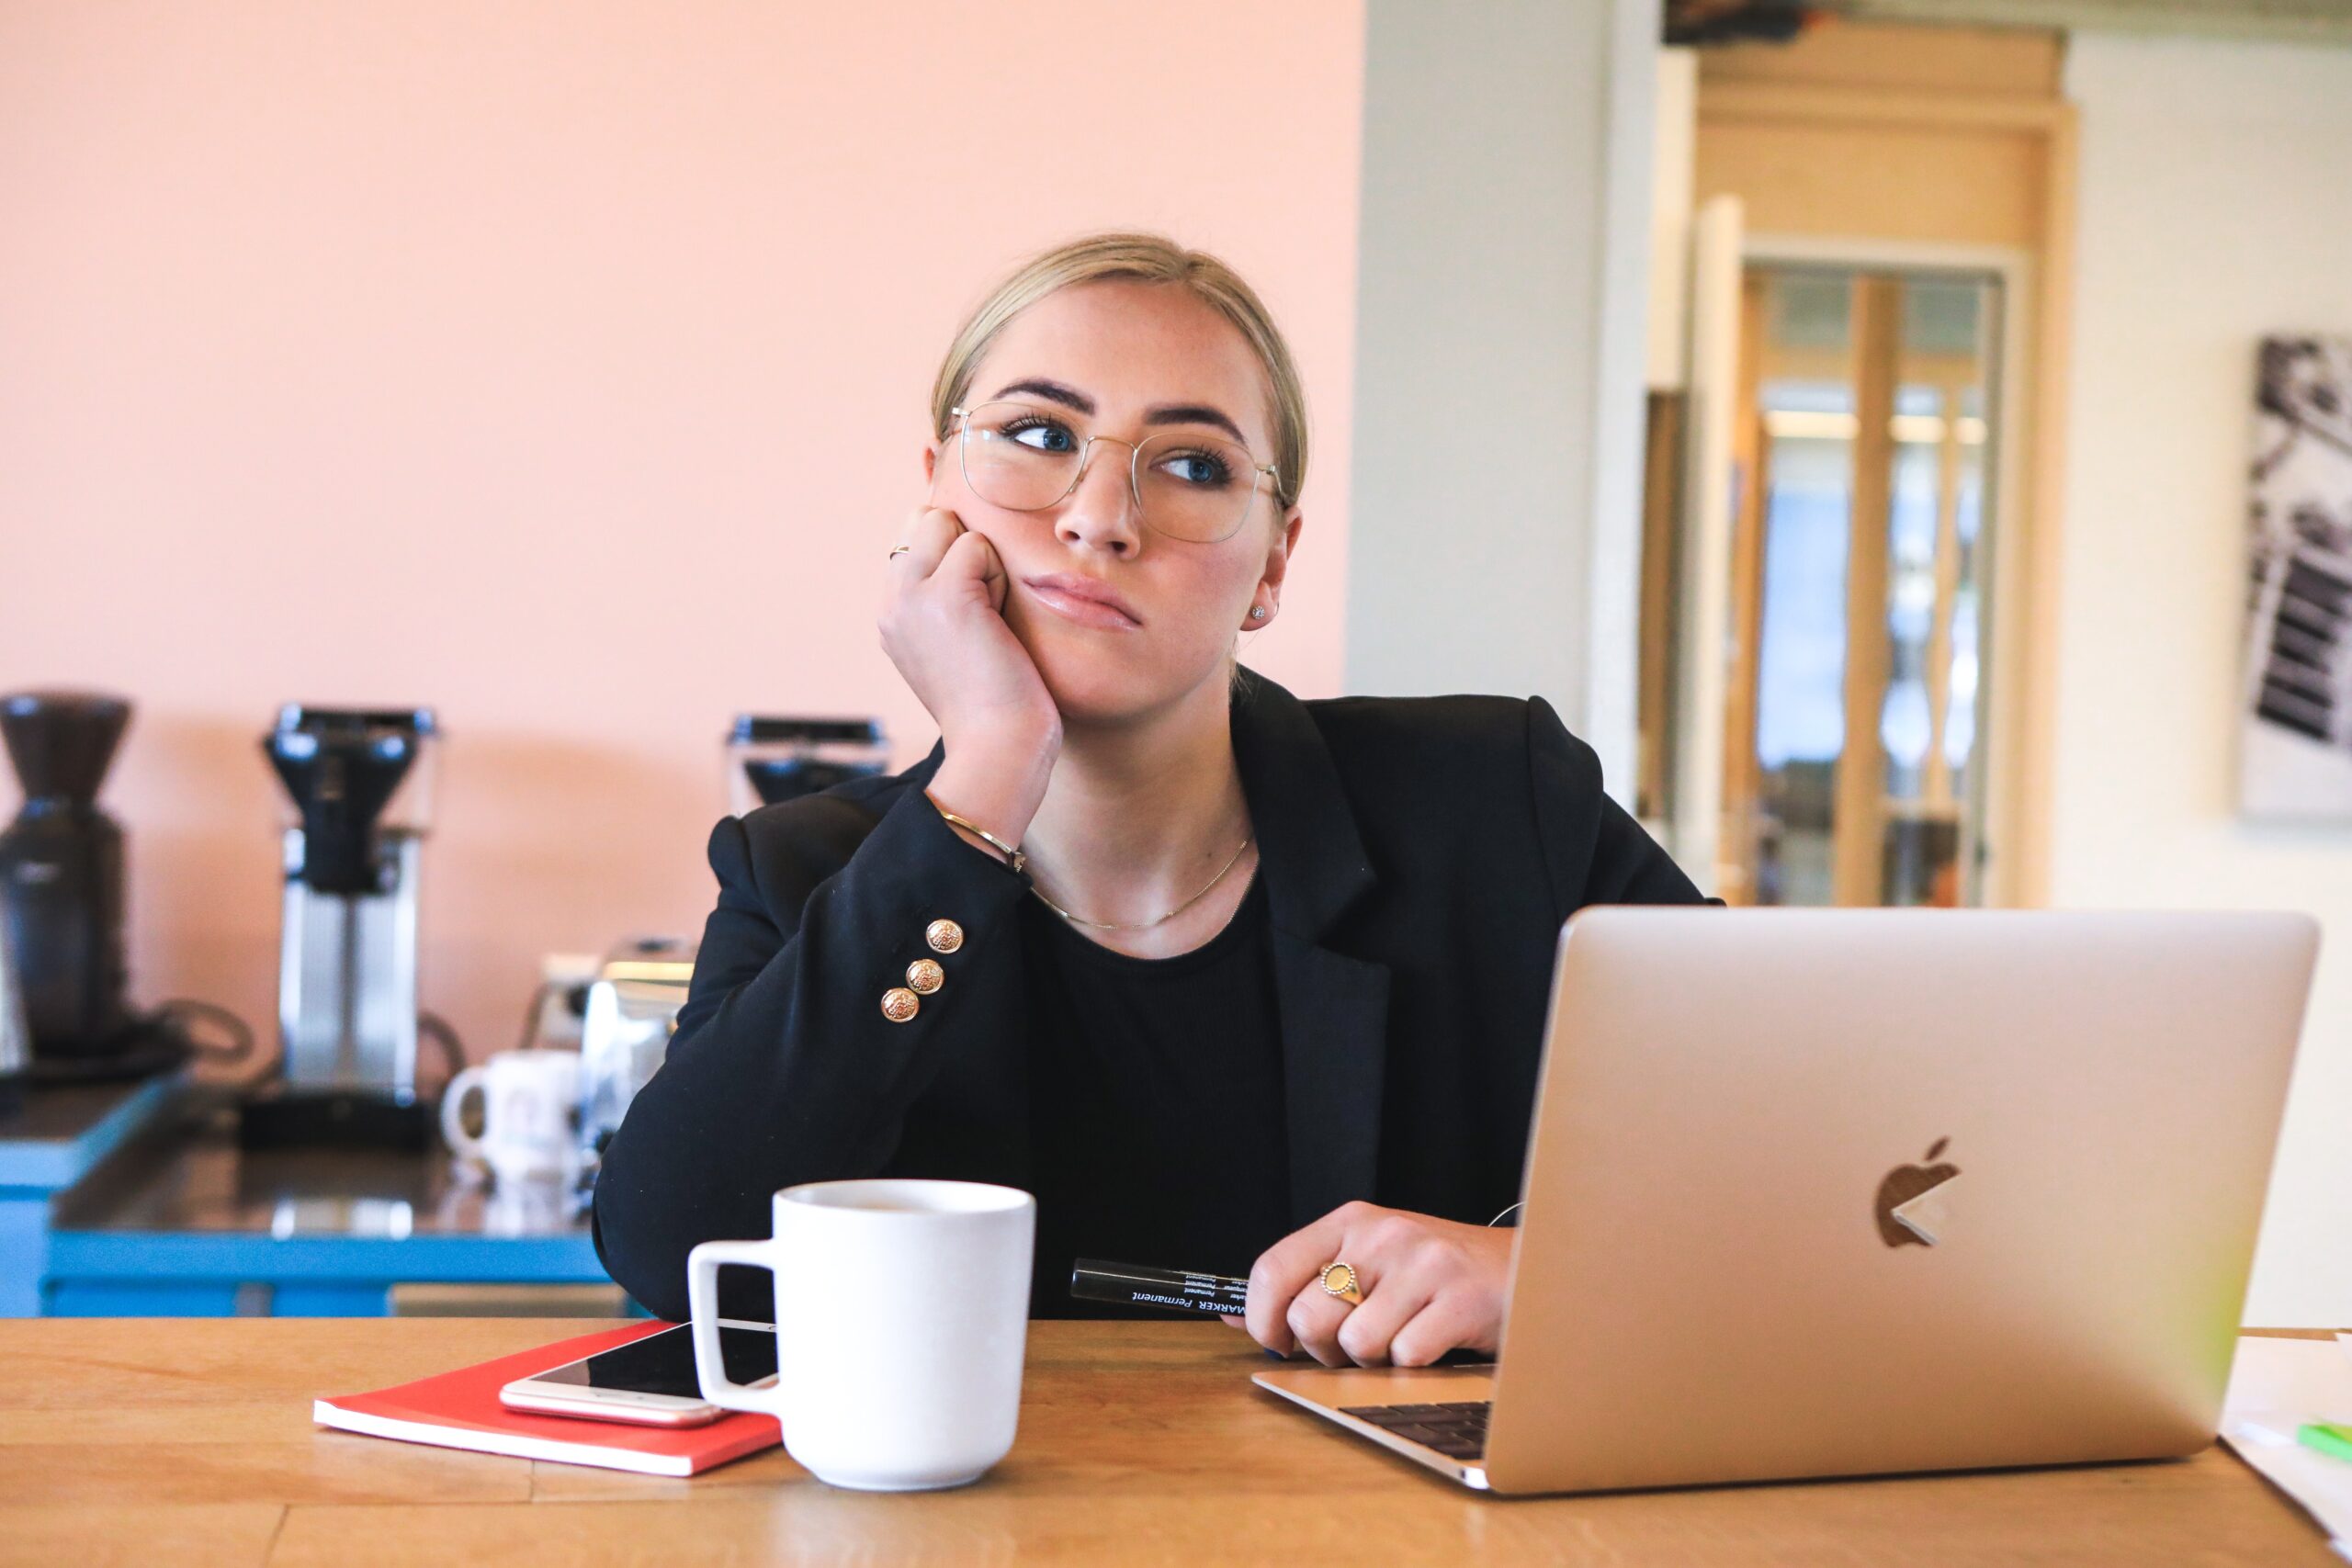 Woman in suit jacket resting her head on her hand looking frustrated with her laptop opened and a cup of beverage in front of her